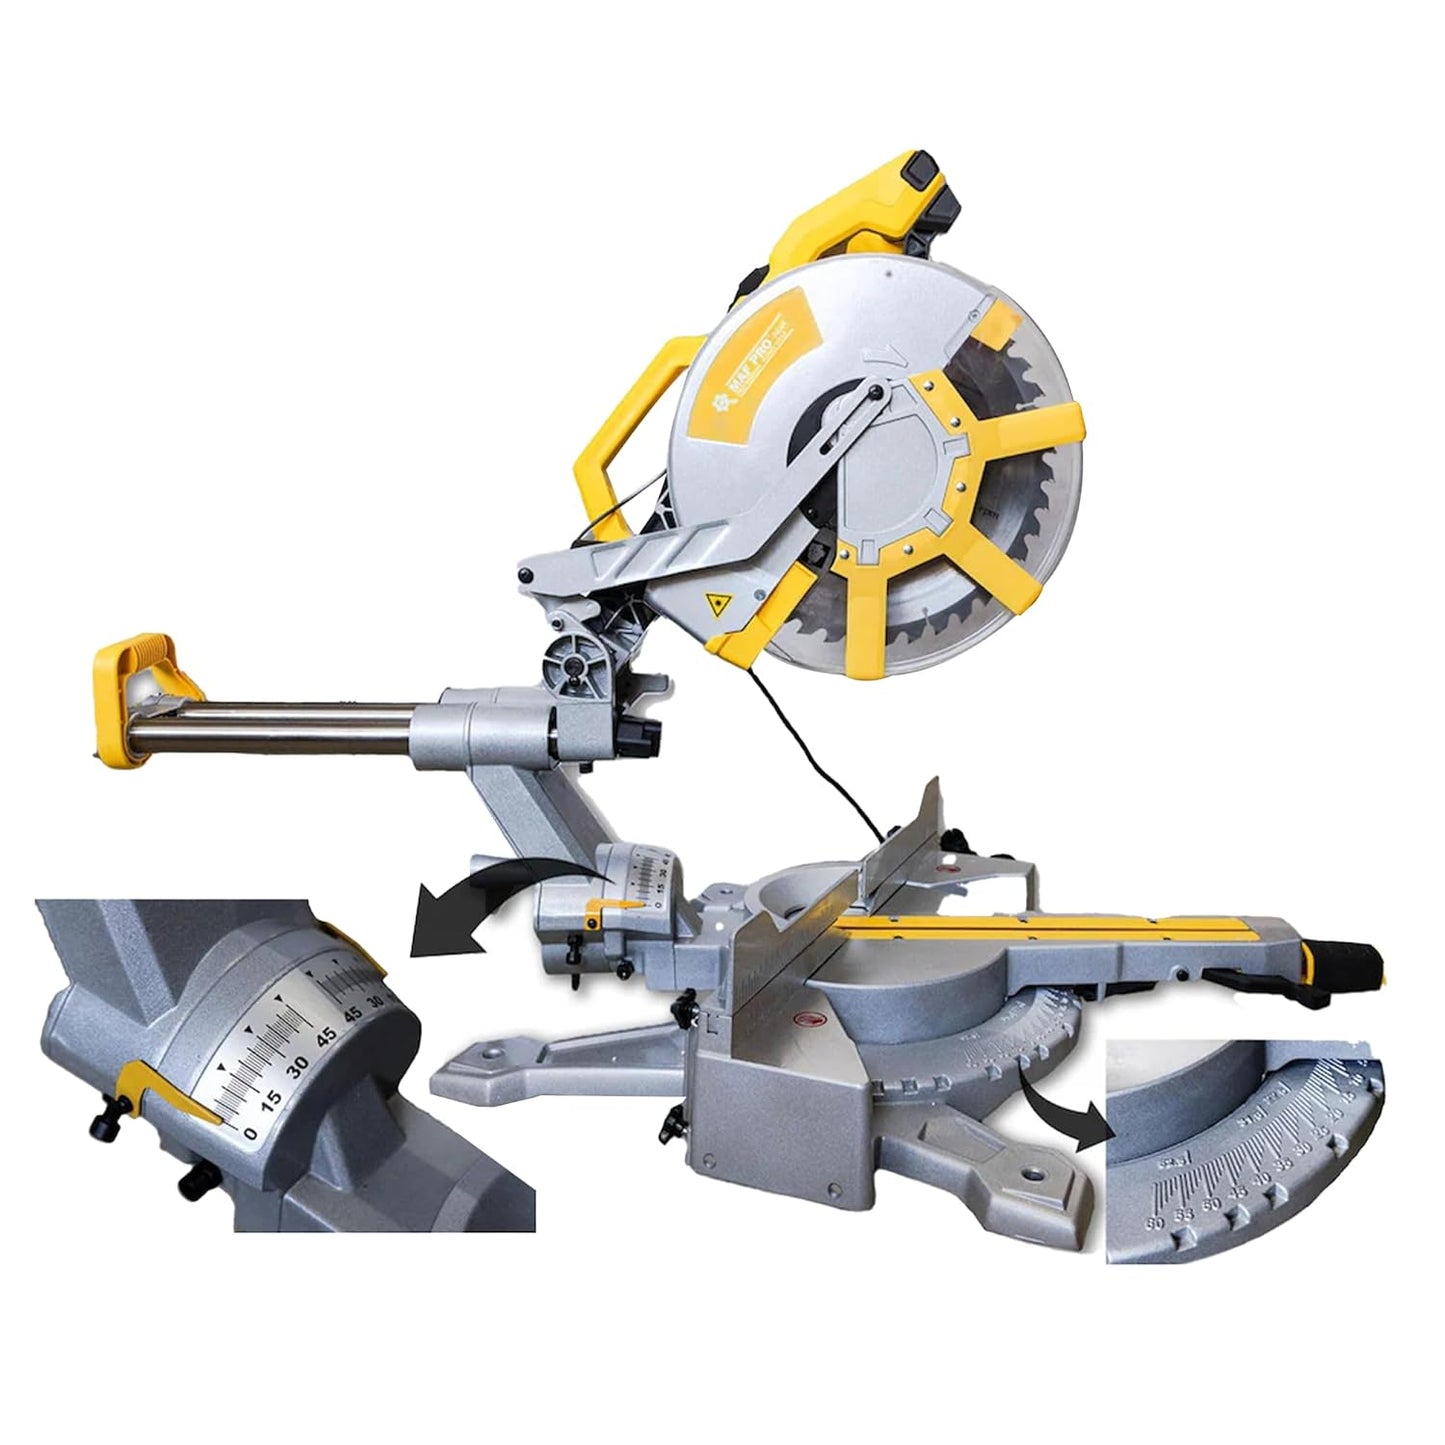 MAF PRO MMS240018 12-Inch Electric Mitre Saw 2400W Heavy Duty 5000 RPM, 305mm Blade Dia for Wood Furniture Aluminum Pipe Cutter